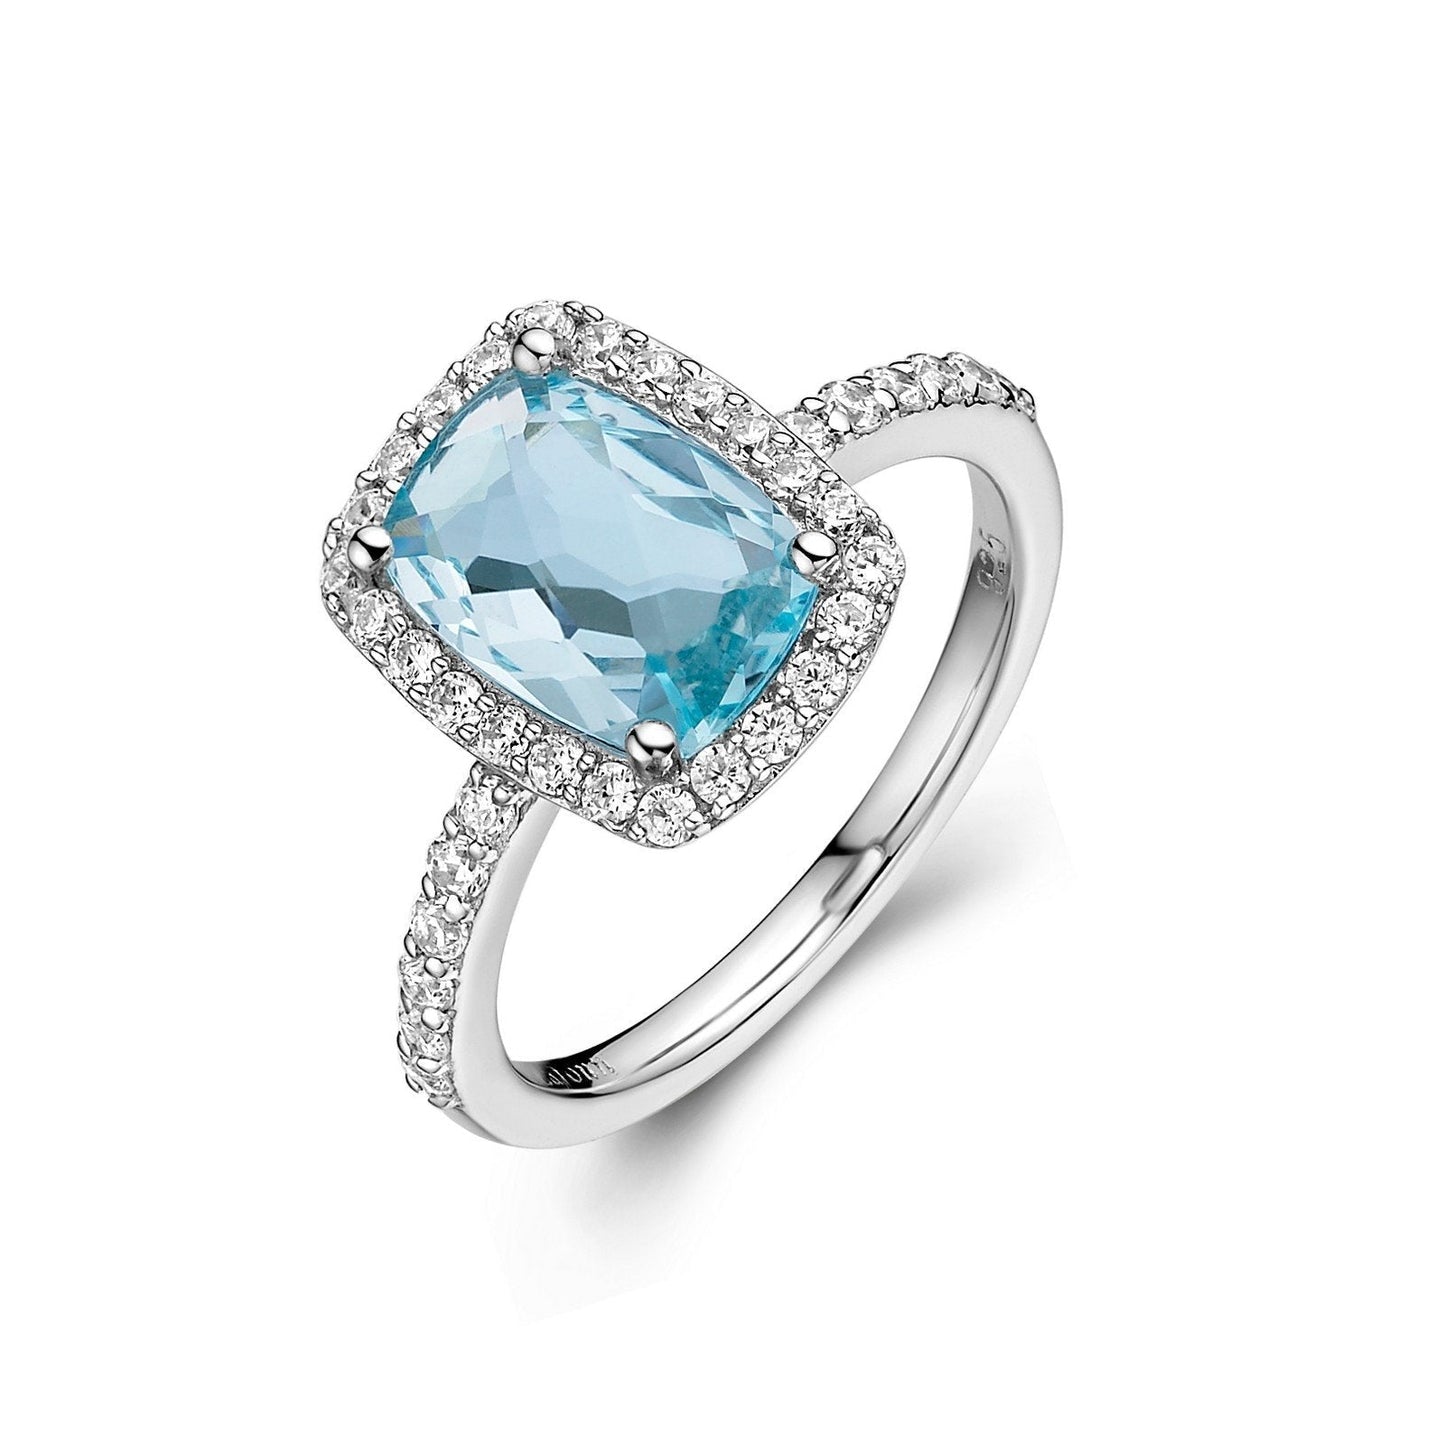 Load image into Gallery viewer, Lafonn Genuine Blue Topaz Halo Ring Blue Topaz RINGS Size 8 Platinum Appx CTW: 3.73 cts. Blue Topaz: Appx 3.21 cts.  Lassaire simulated diamonds: 0.52 cts. CTS 
